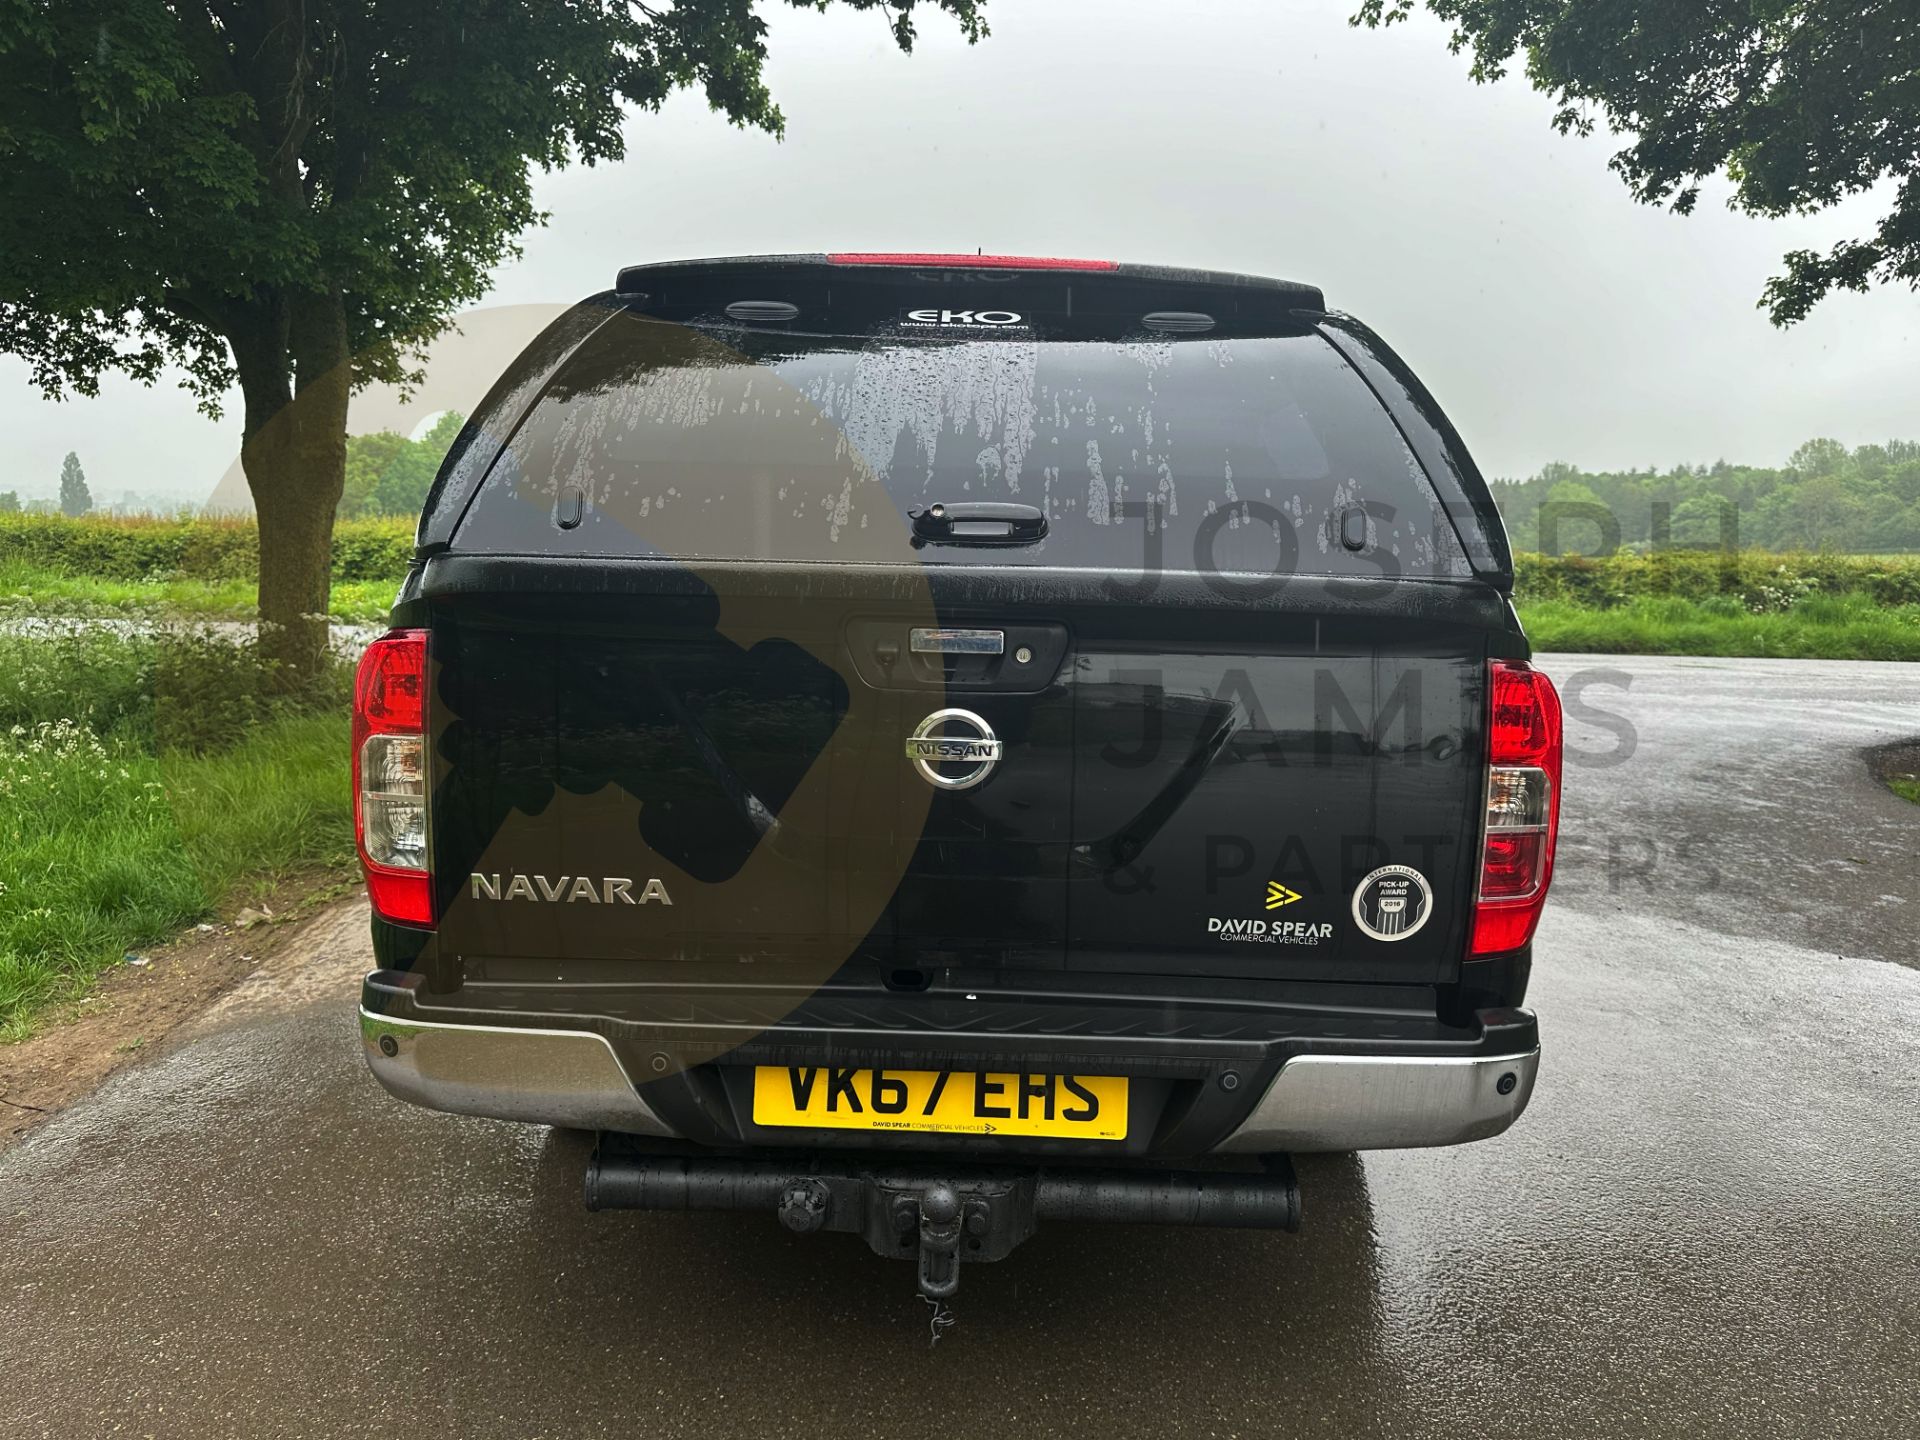 (ON SALE) NISSAN NAVARA *TREK-1 EDITION* DOUBLE CAB PICK-UP (2018 - EURO 6) 2.3 DCI - AUTOMATIC - Image 11 of 52